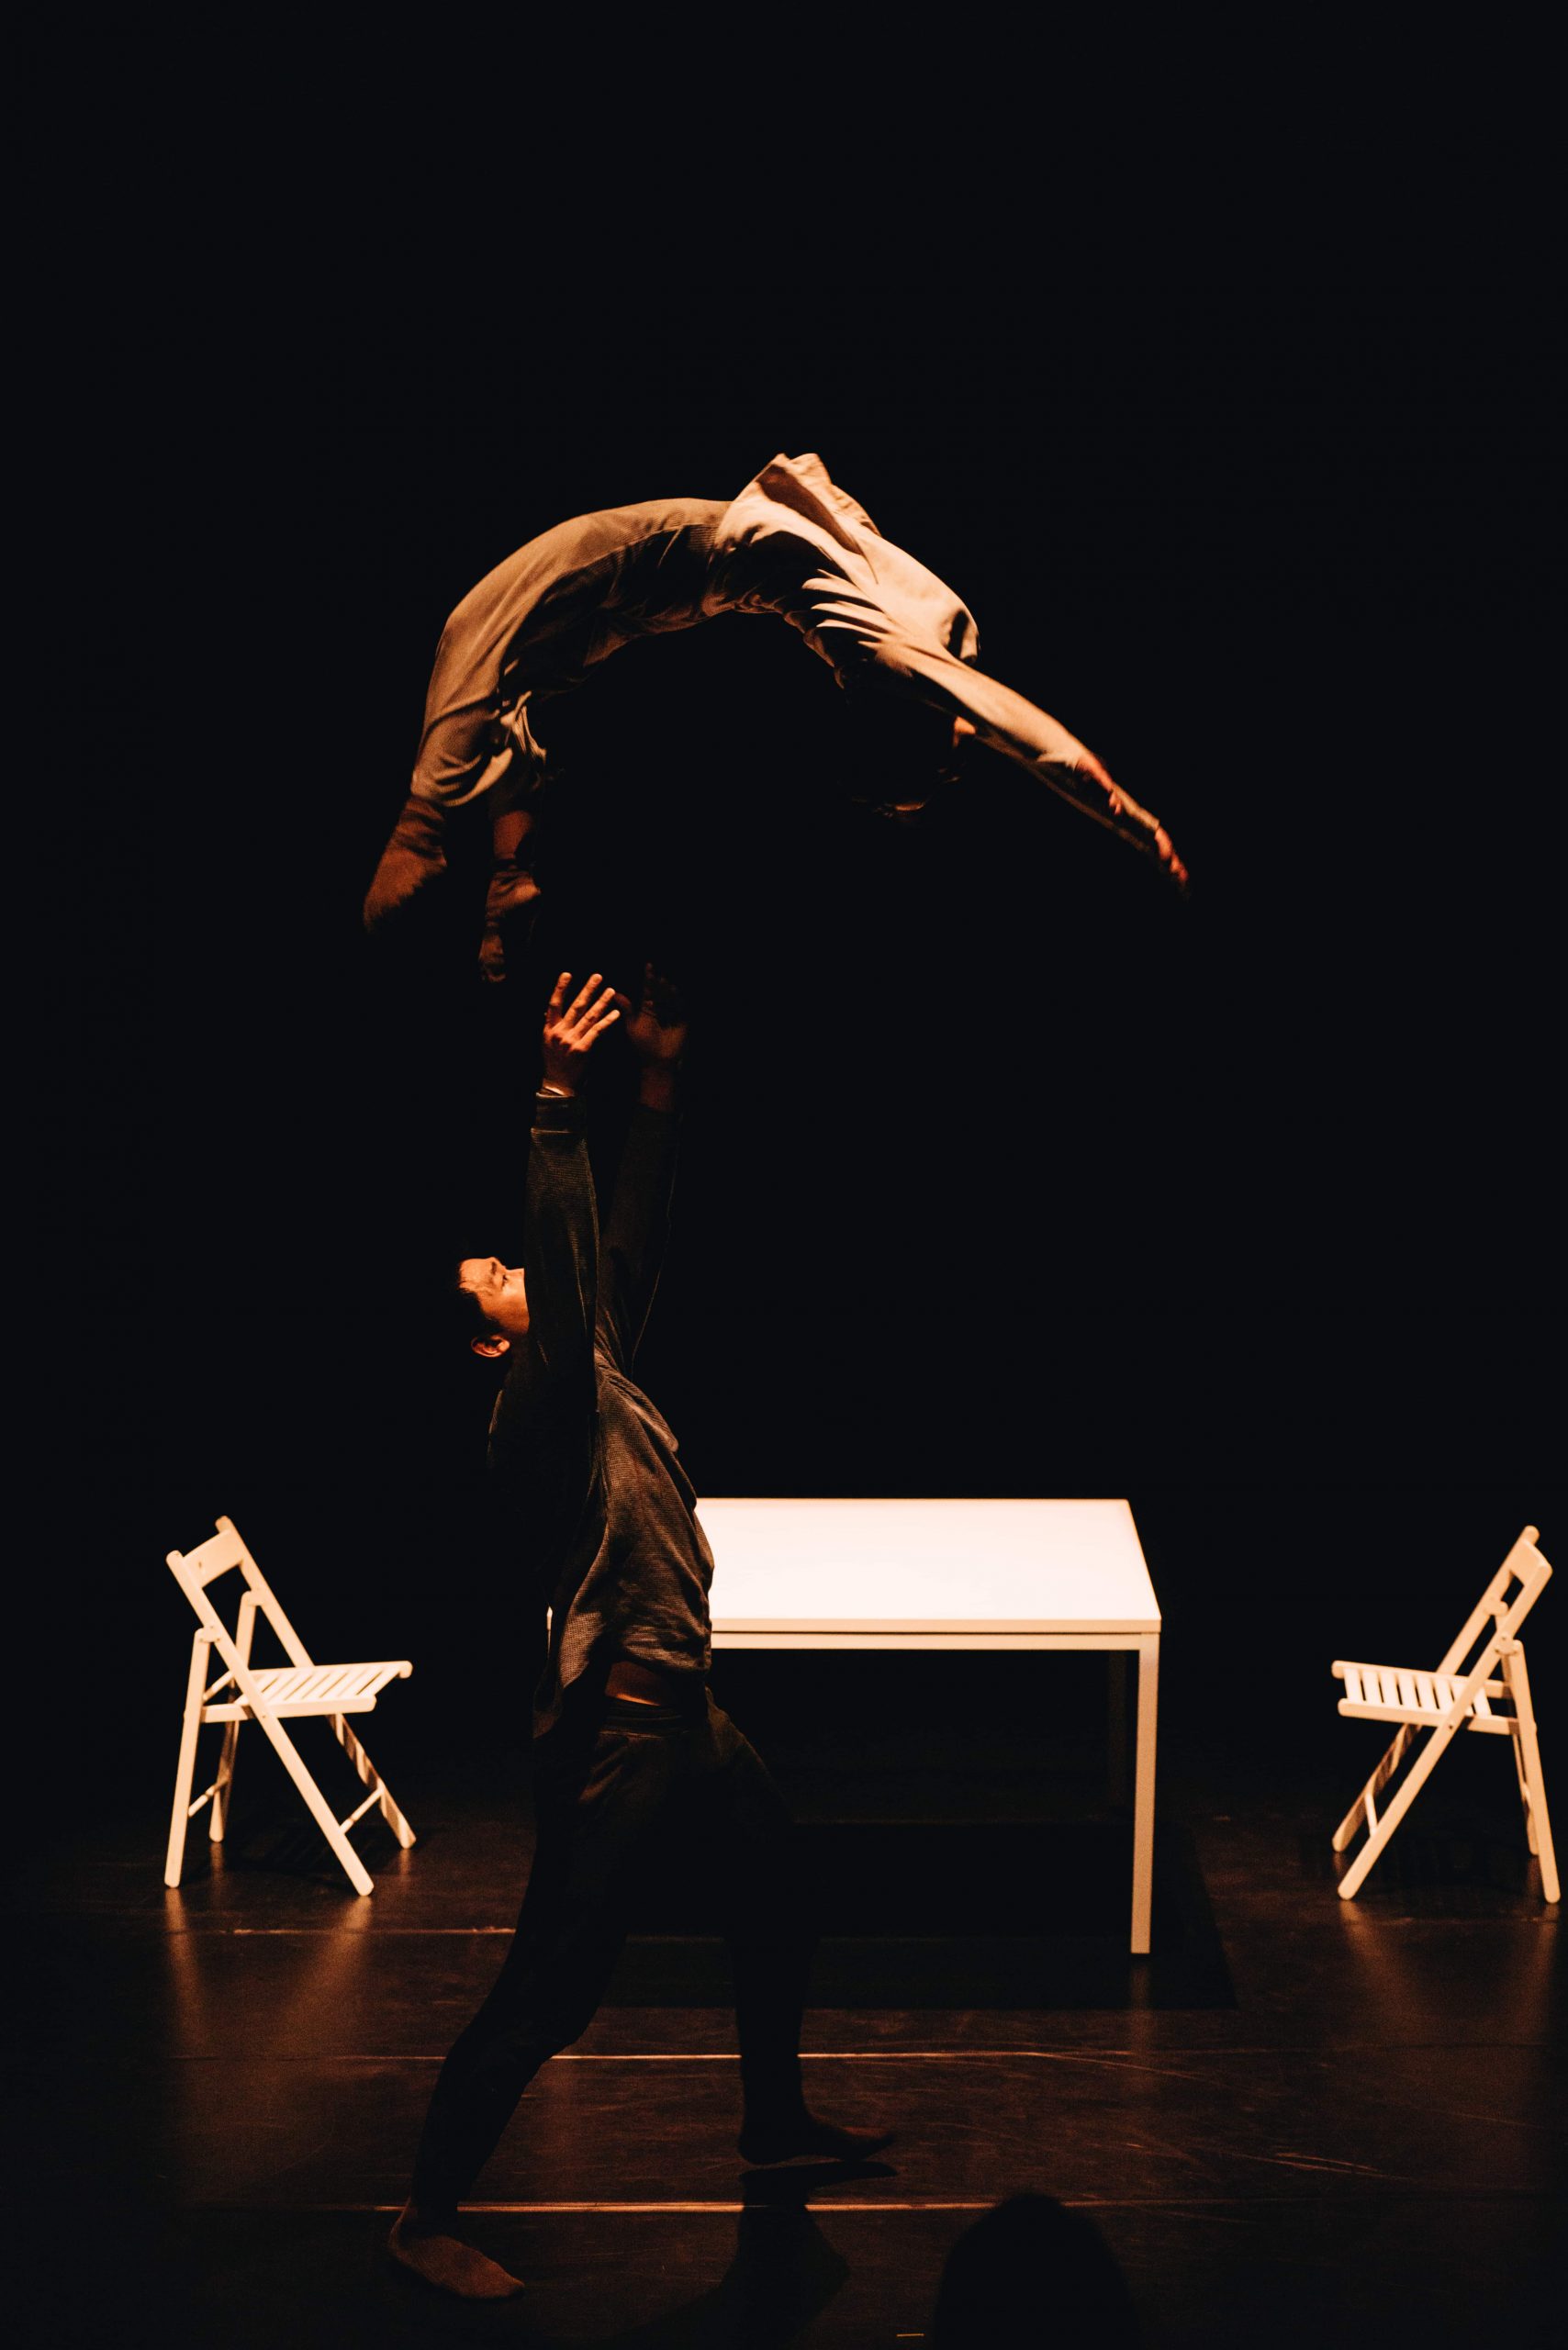 2. ©0471 Acro Physical Theatre, Photo by HO Chao-Sheng